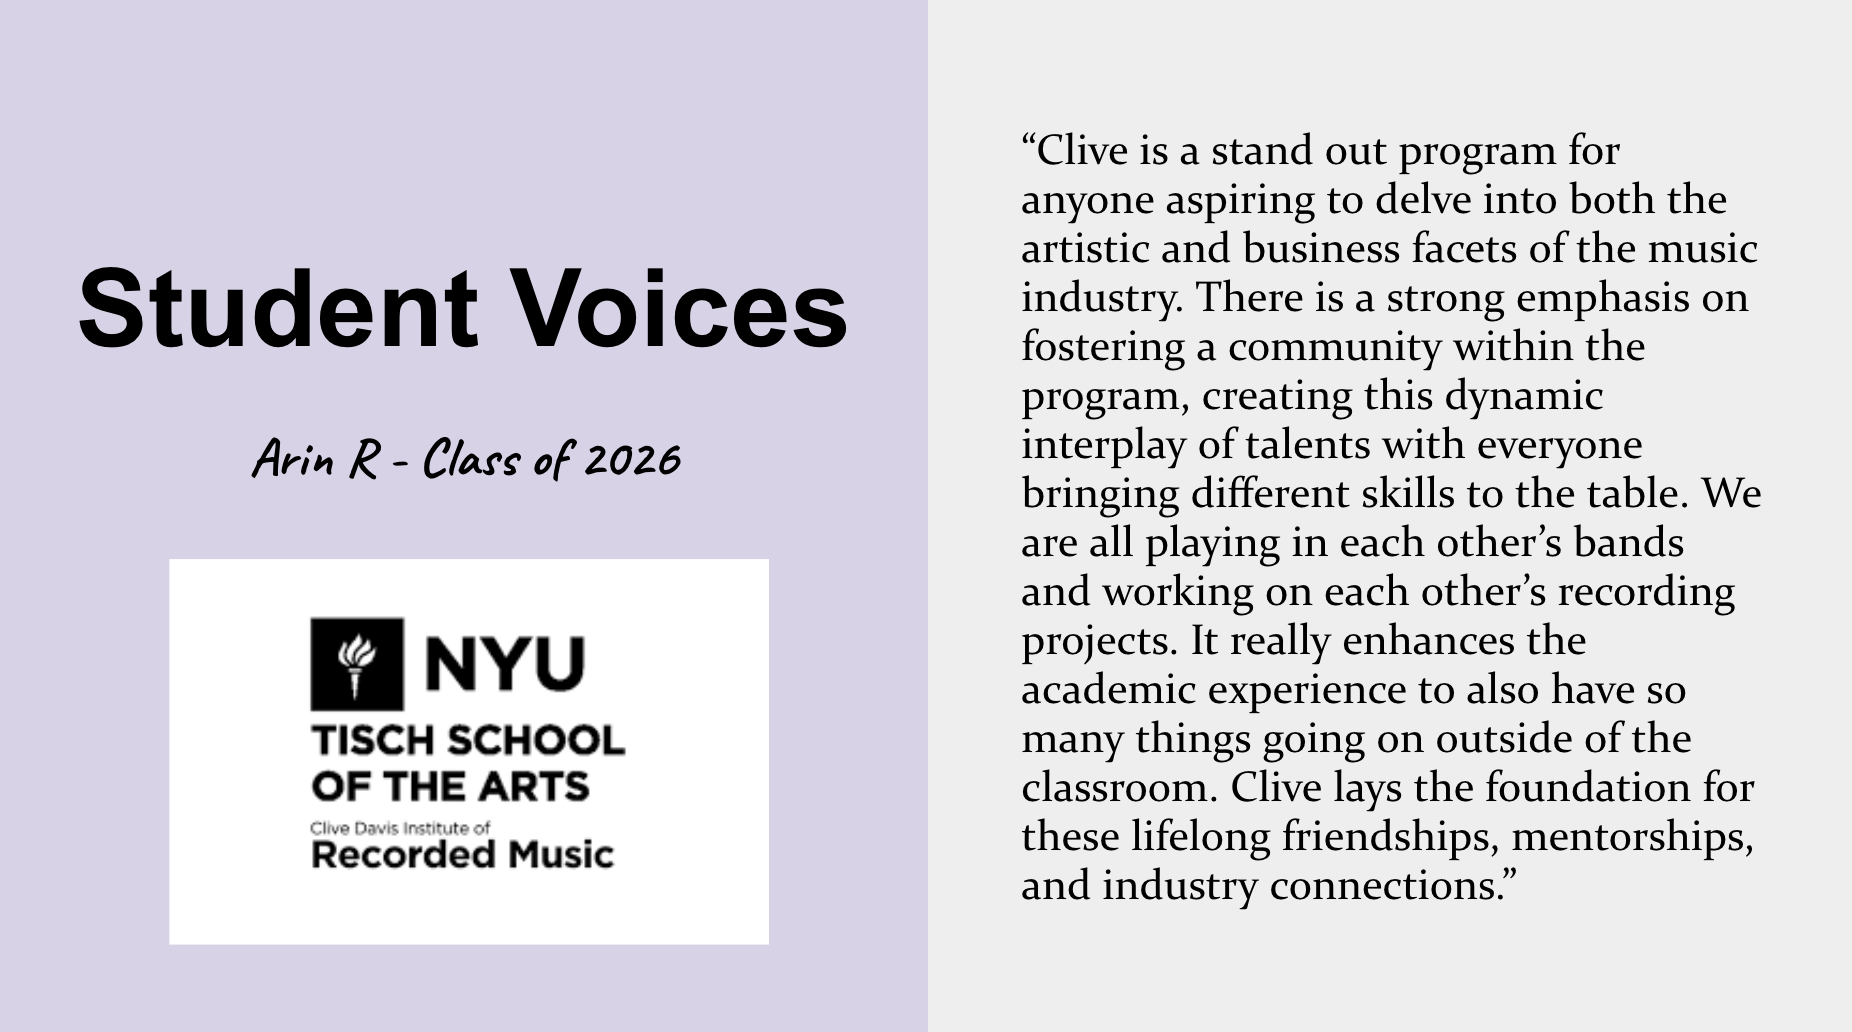 Student voice about the Tisch Recorded Music major. Arin R., Class of 2026, says “Clive is a stand out program for anyone aspiring to delve into both the artistic and business facets of the music industry. There is a strong emphasis on fostering a community within the program, creating this dynamic interplay of talents with everyone bringing different skills to the table. We are all playing in each other’s bands and working on each other’s recording projects. It really enhances the academic experience to also have so many things going on outside of the classroom. Clive lays the foundation for these lifelong friendships, mentorships, and industry connections.”